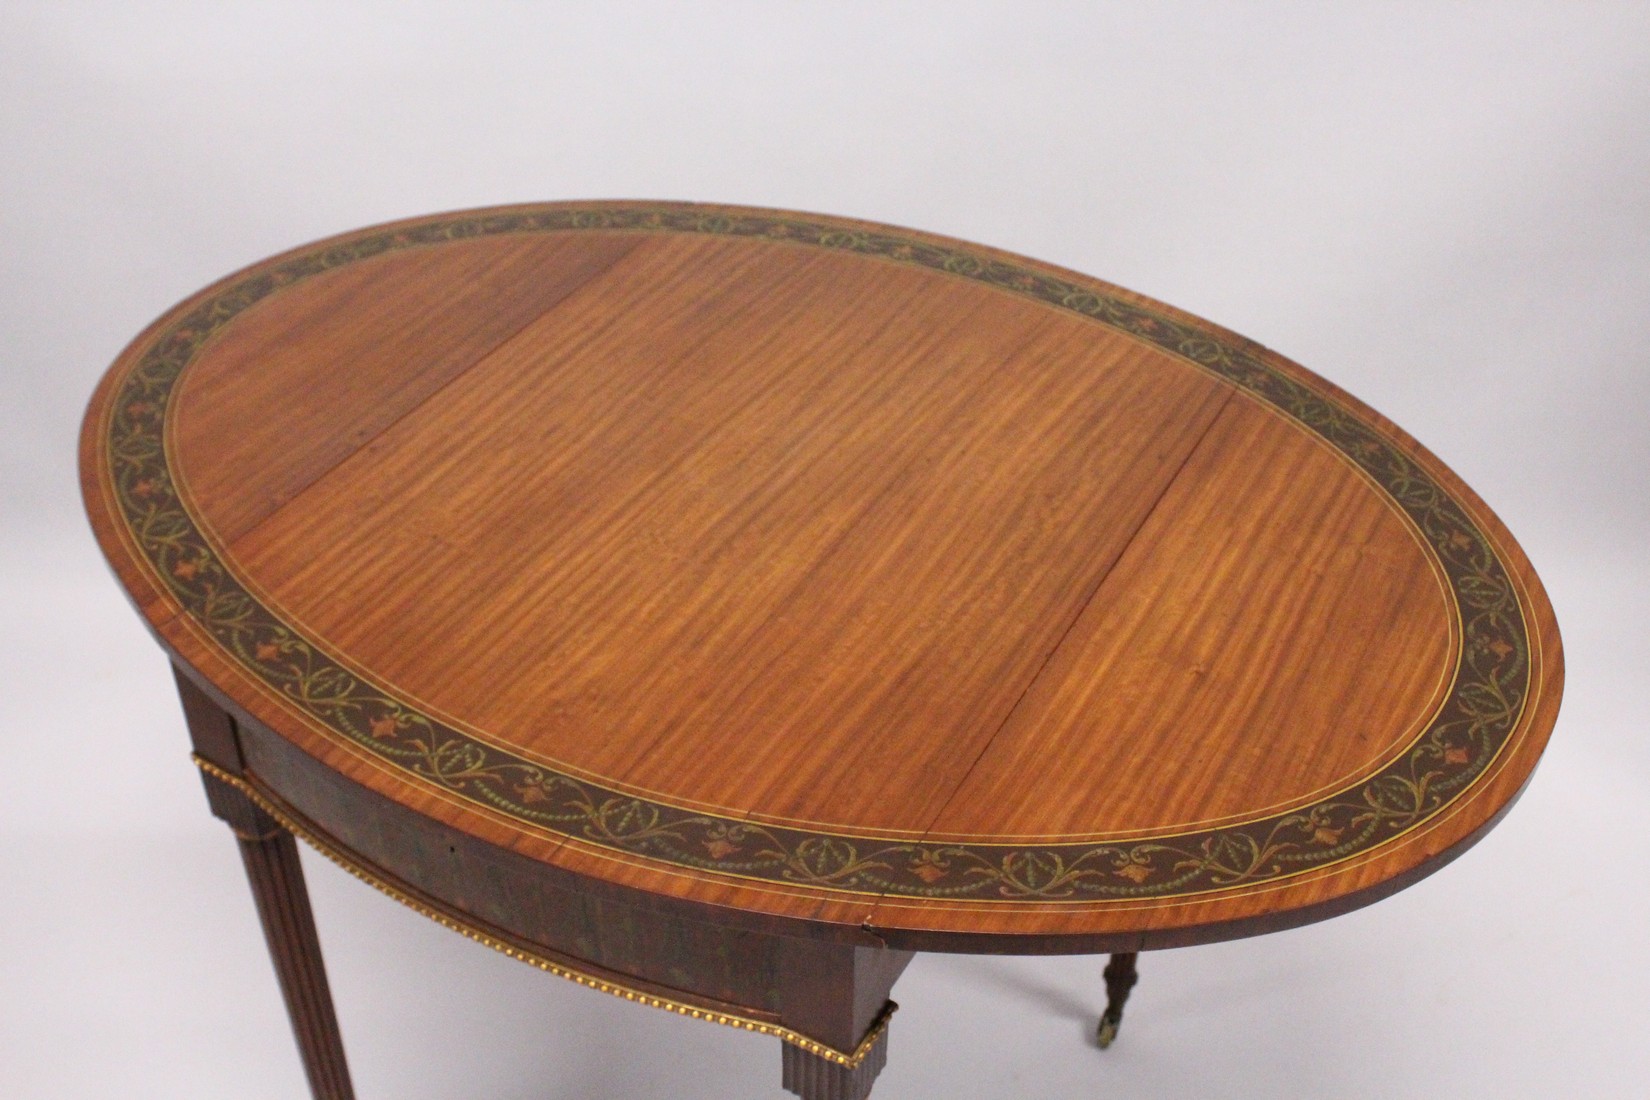 A VERY GOOD EDWARDIAN MAHOGANY AND PAINTED PEMBROOKE TABLE, PROBABLY GILLOW, the oval top painted - Image 7 of 17